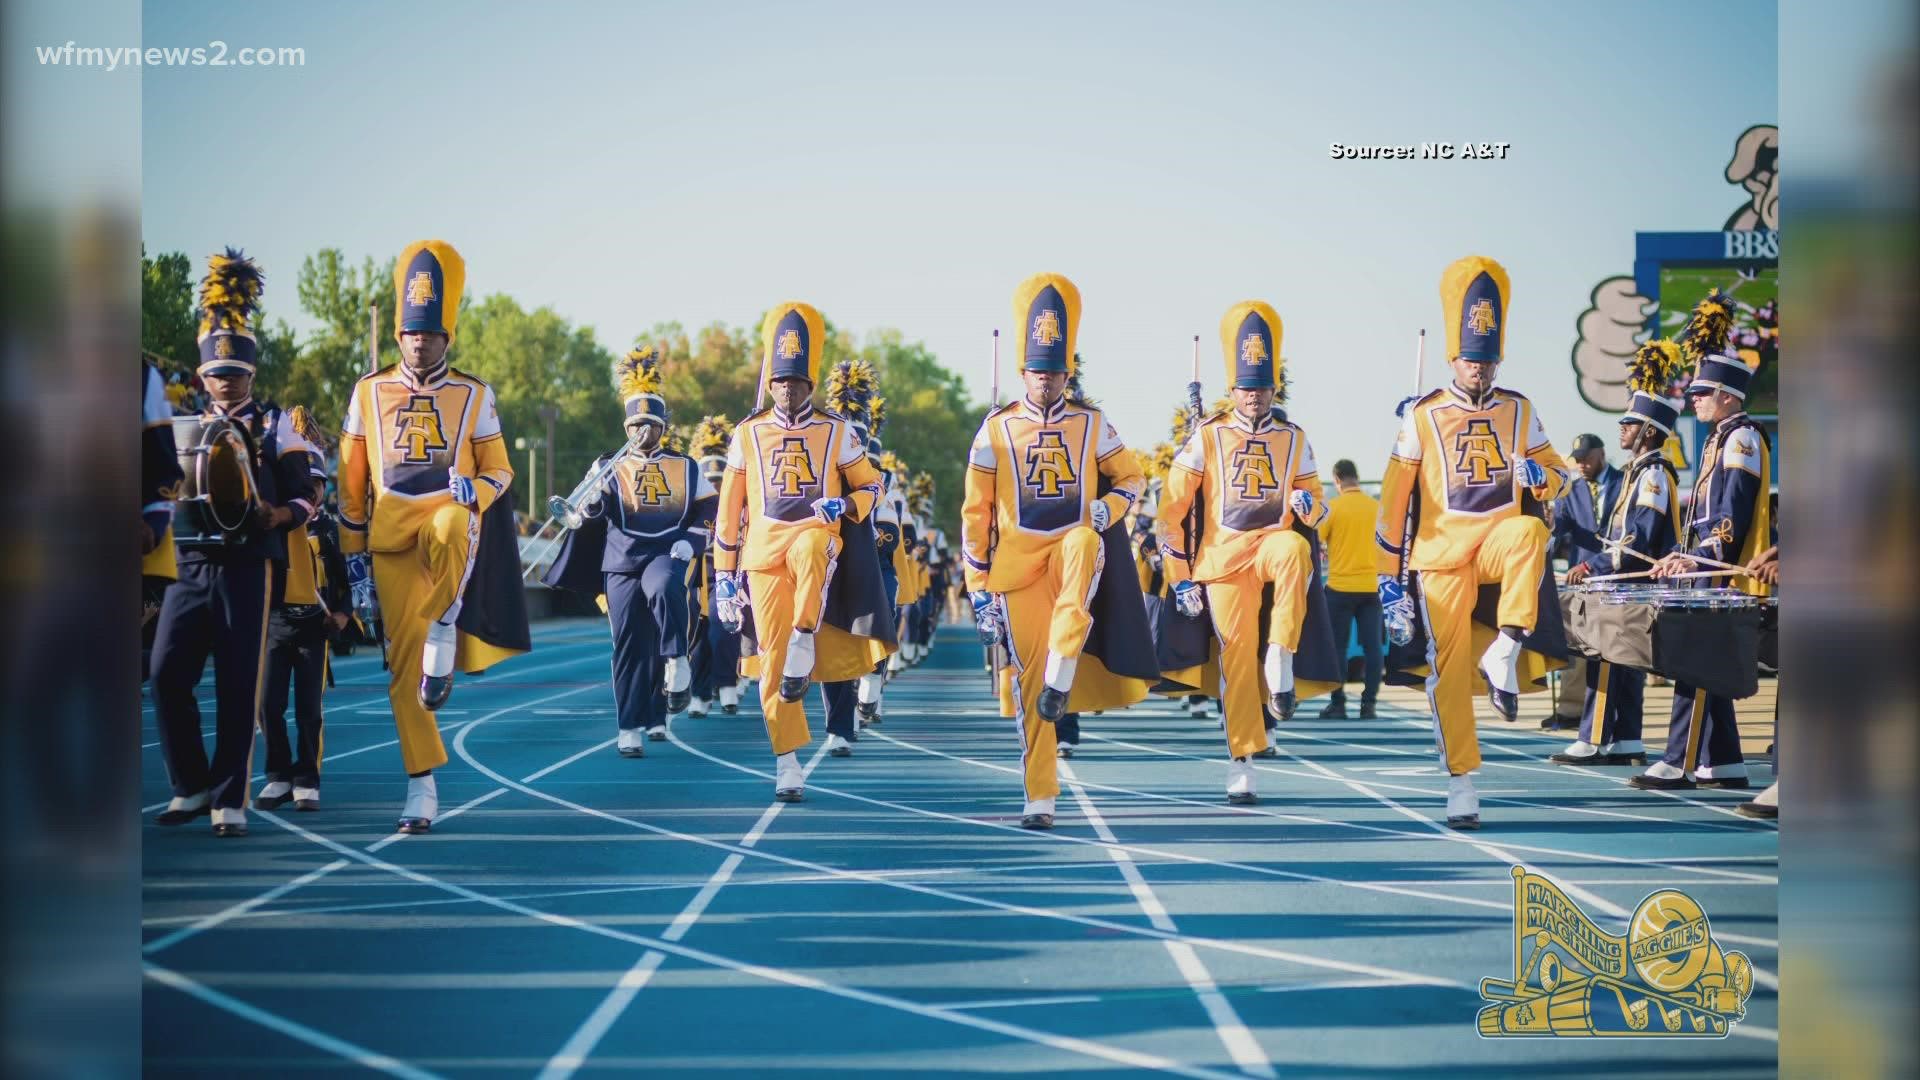 North Carolina A&T's "Blue and Gold Marching Machine" will showcase its talents in Houston.